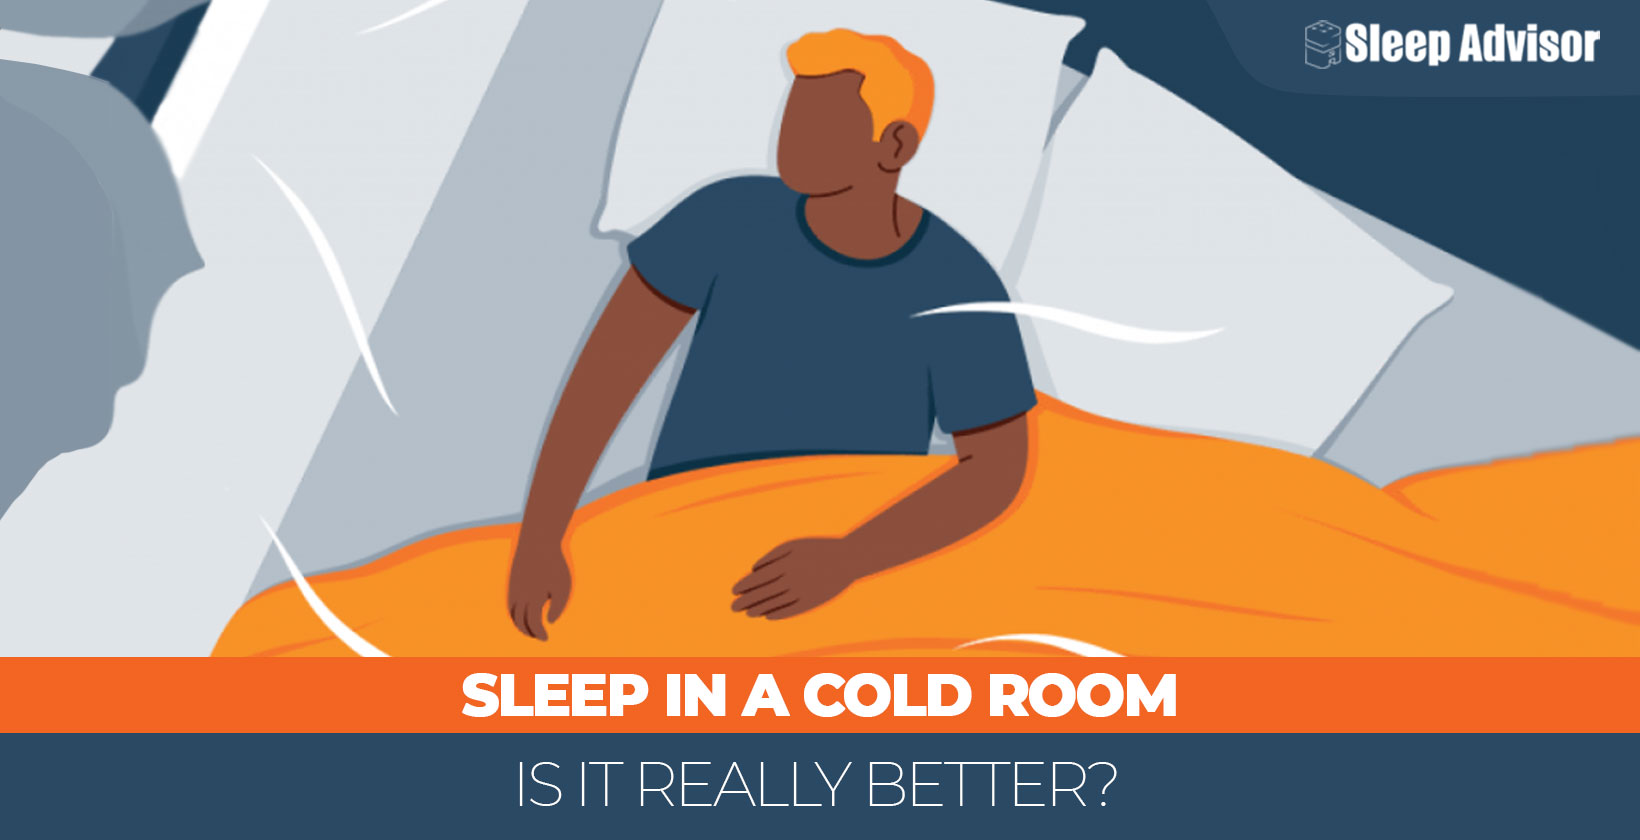 Why Do I Get So Hot When I Sleep? 7 Reasons Plus Solutions